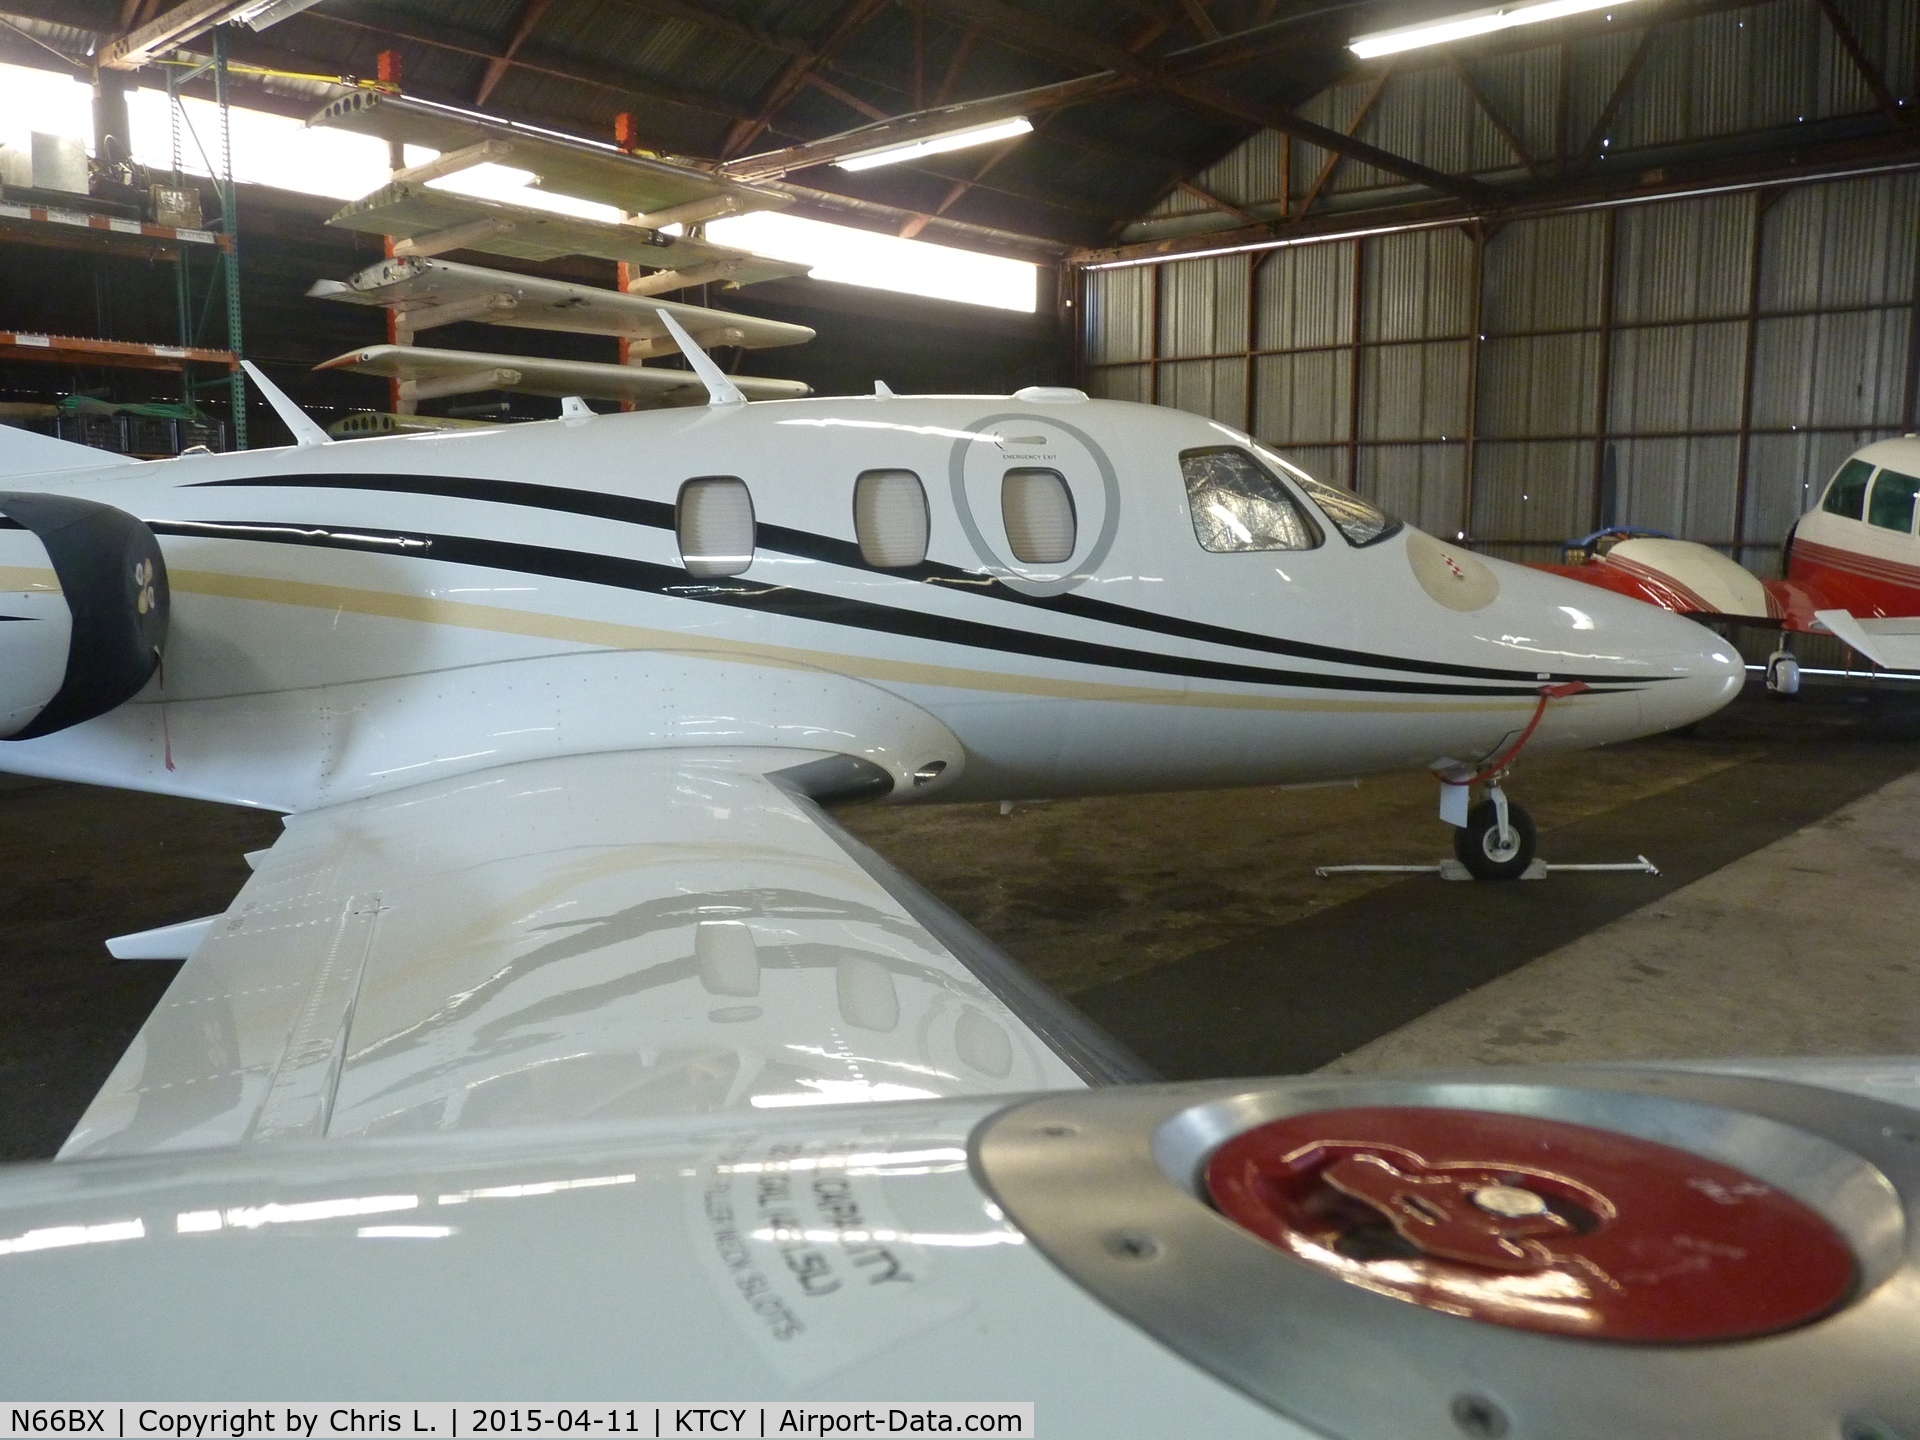 N66BX, 2008 Eclipse Aviation Corp EA500 C/N 000154, A rare 2008 Eclipse 500 sitting inside the Skyview Aviation hangar at Tracy Municipal Airport.